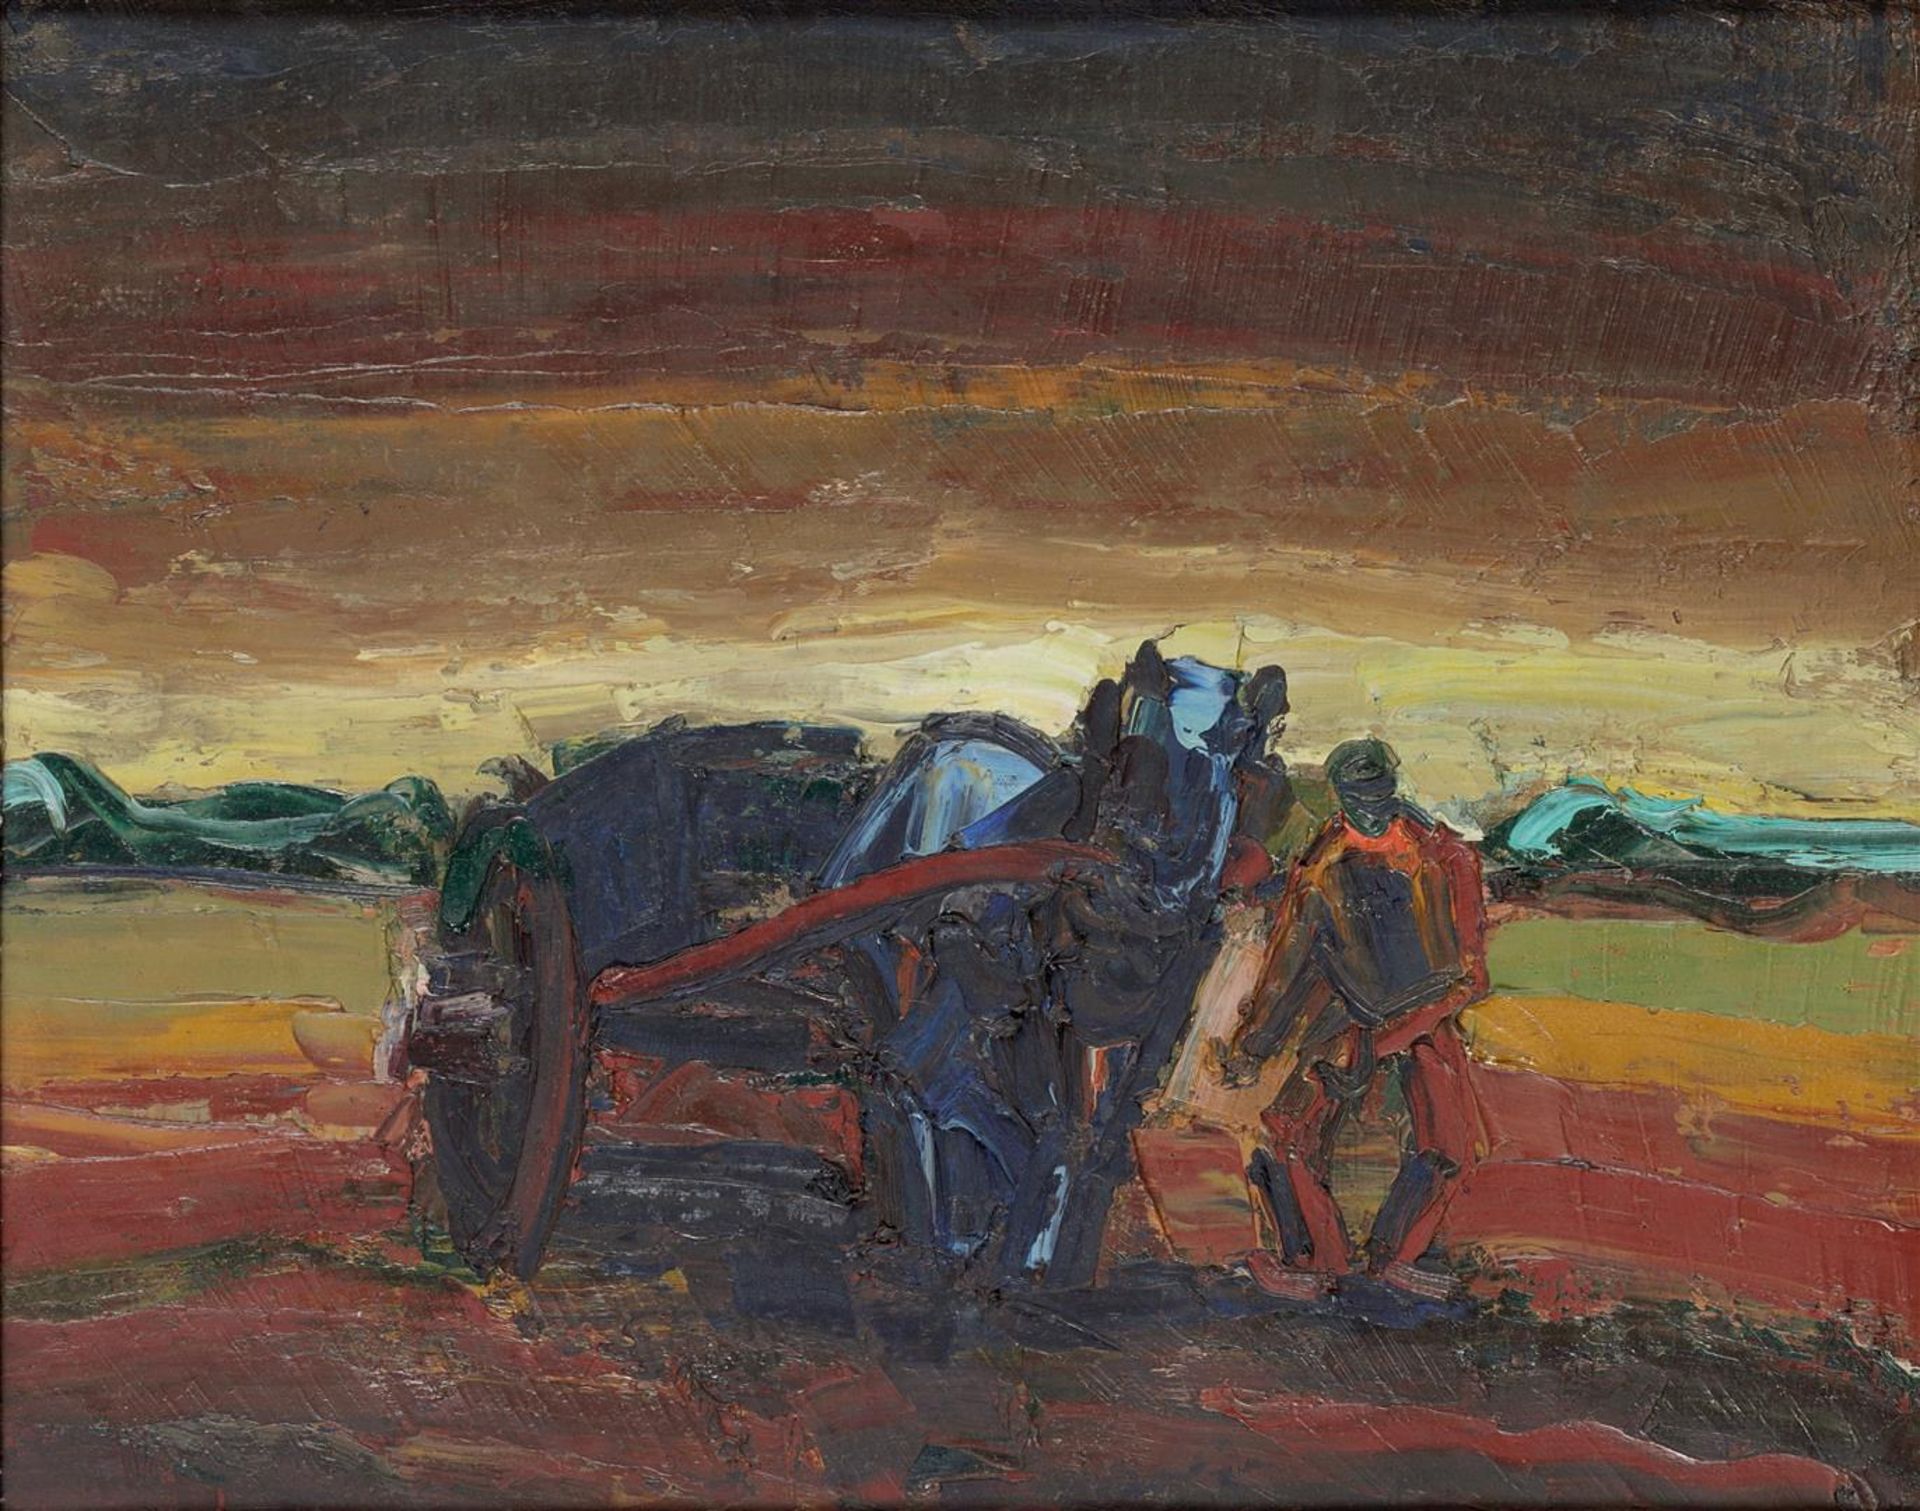 Belgian expressionist, ca. 1950 - 1960, Ploughing farmer. Signed "Reynier" (verso), oil on canvas.